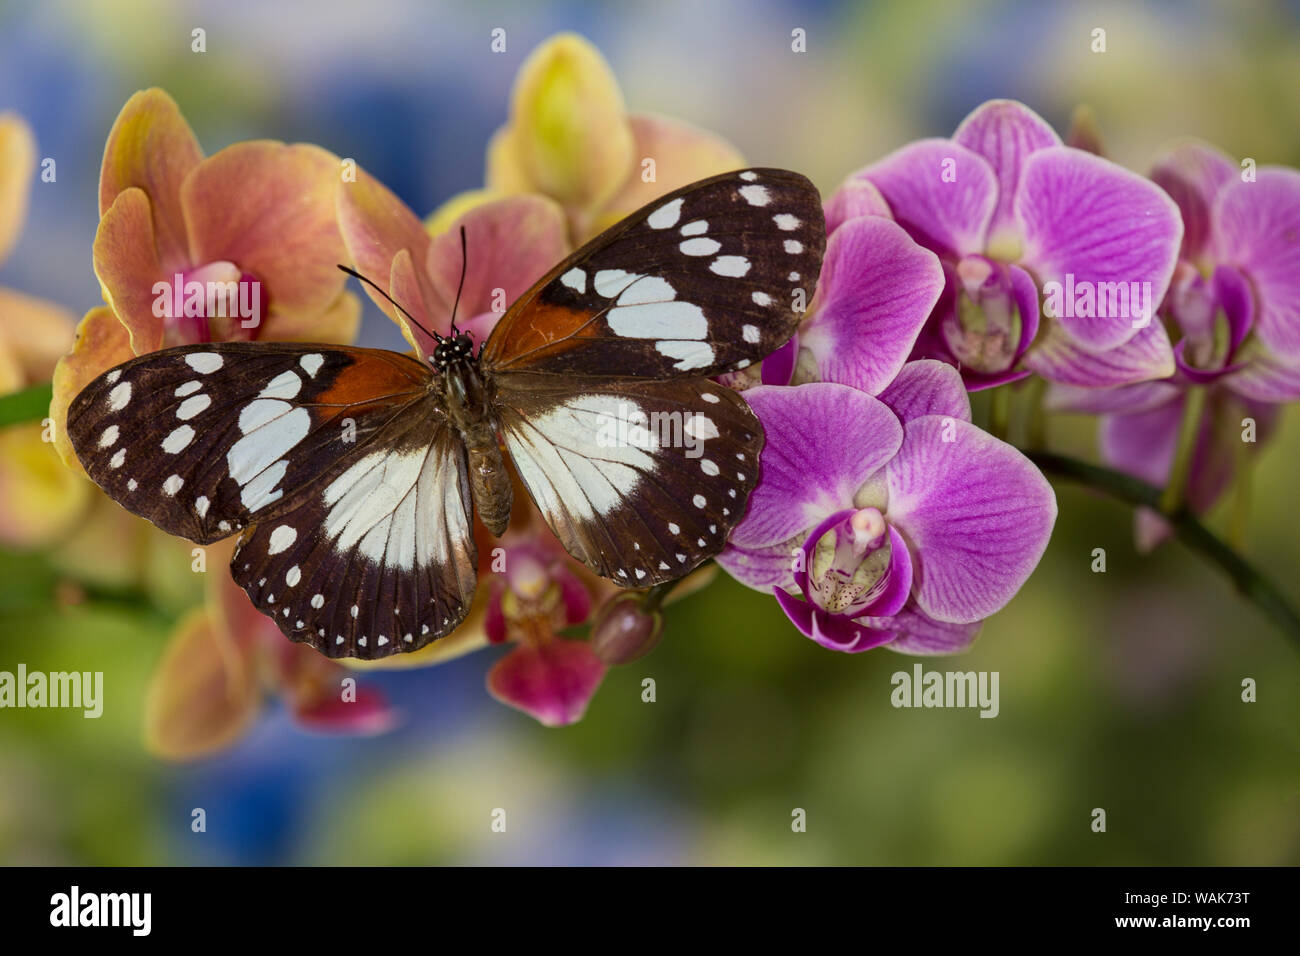 Bộ sưu tập cánh vẩy 4 - Page 24 Moth-orchid-phalaenopsis-and-tropical-butterfly-euxanthe-wakefieldi-WAK73T